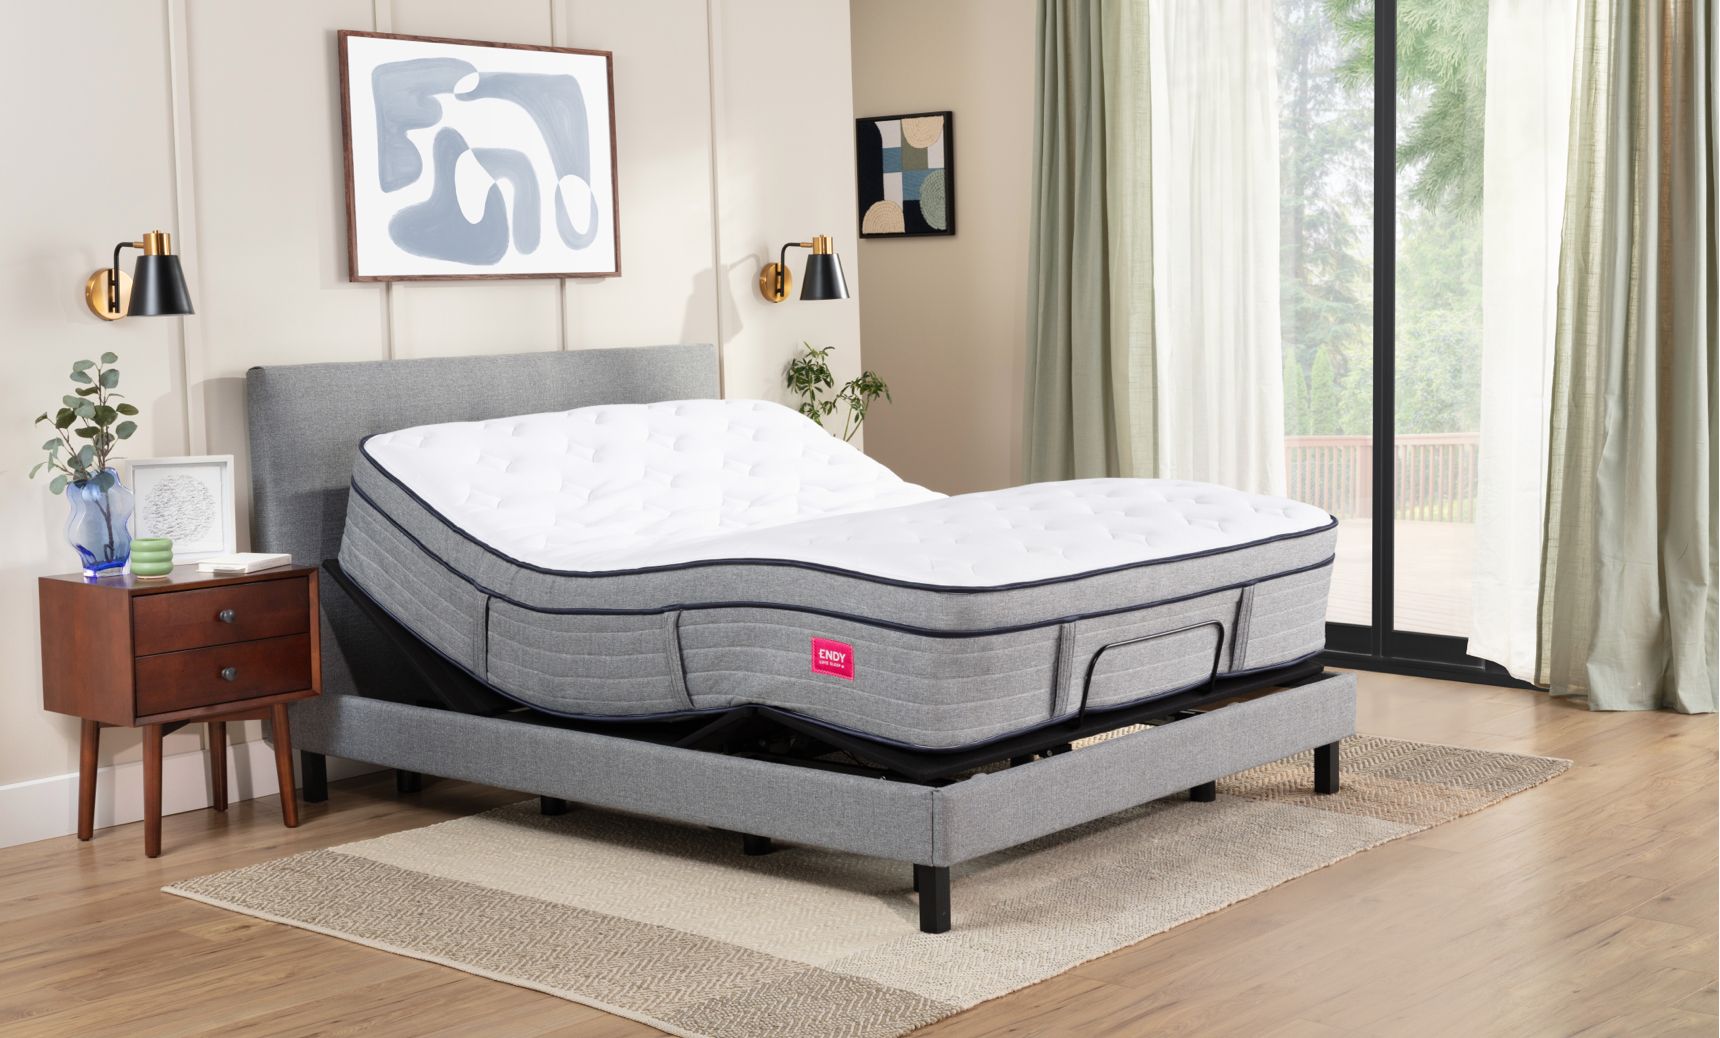 Endy Upholstered Adjustable Bed Twin XL Variant shown with Twin XL Hybrid Mattresses